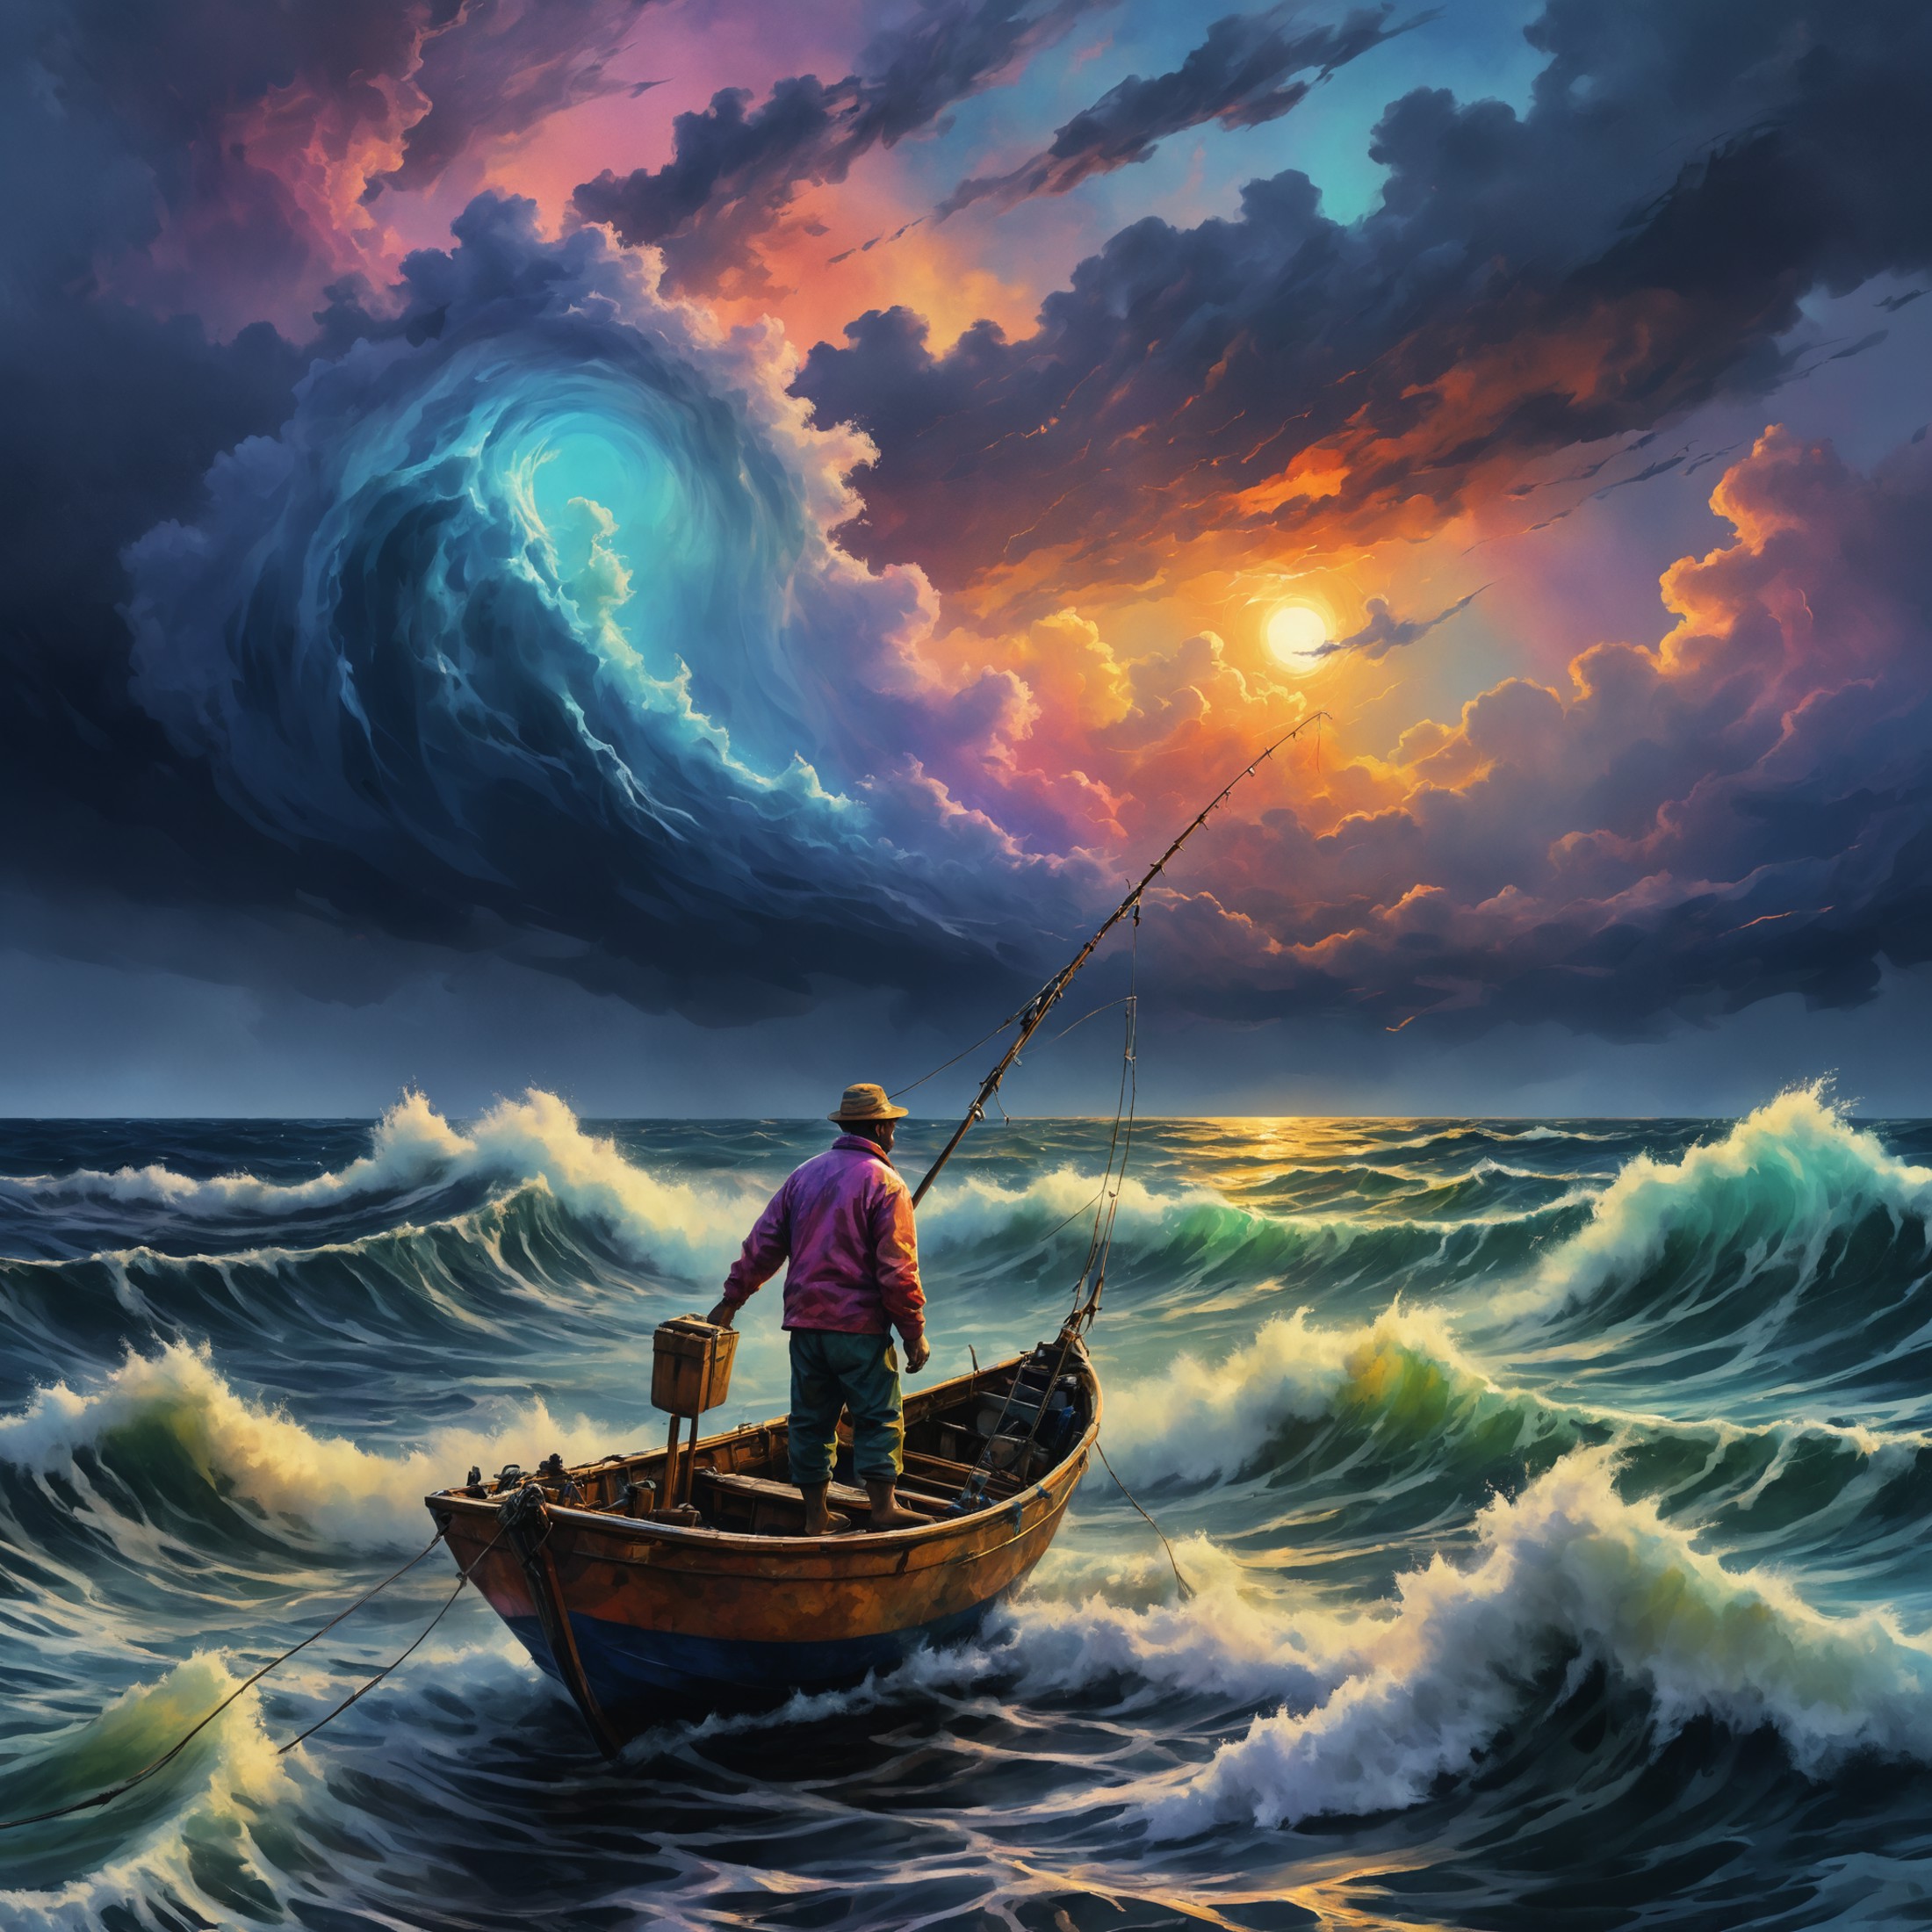 an impressionistic artwork LSD Trip an fisherman on open see in a stormy sea ,colorful sky
